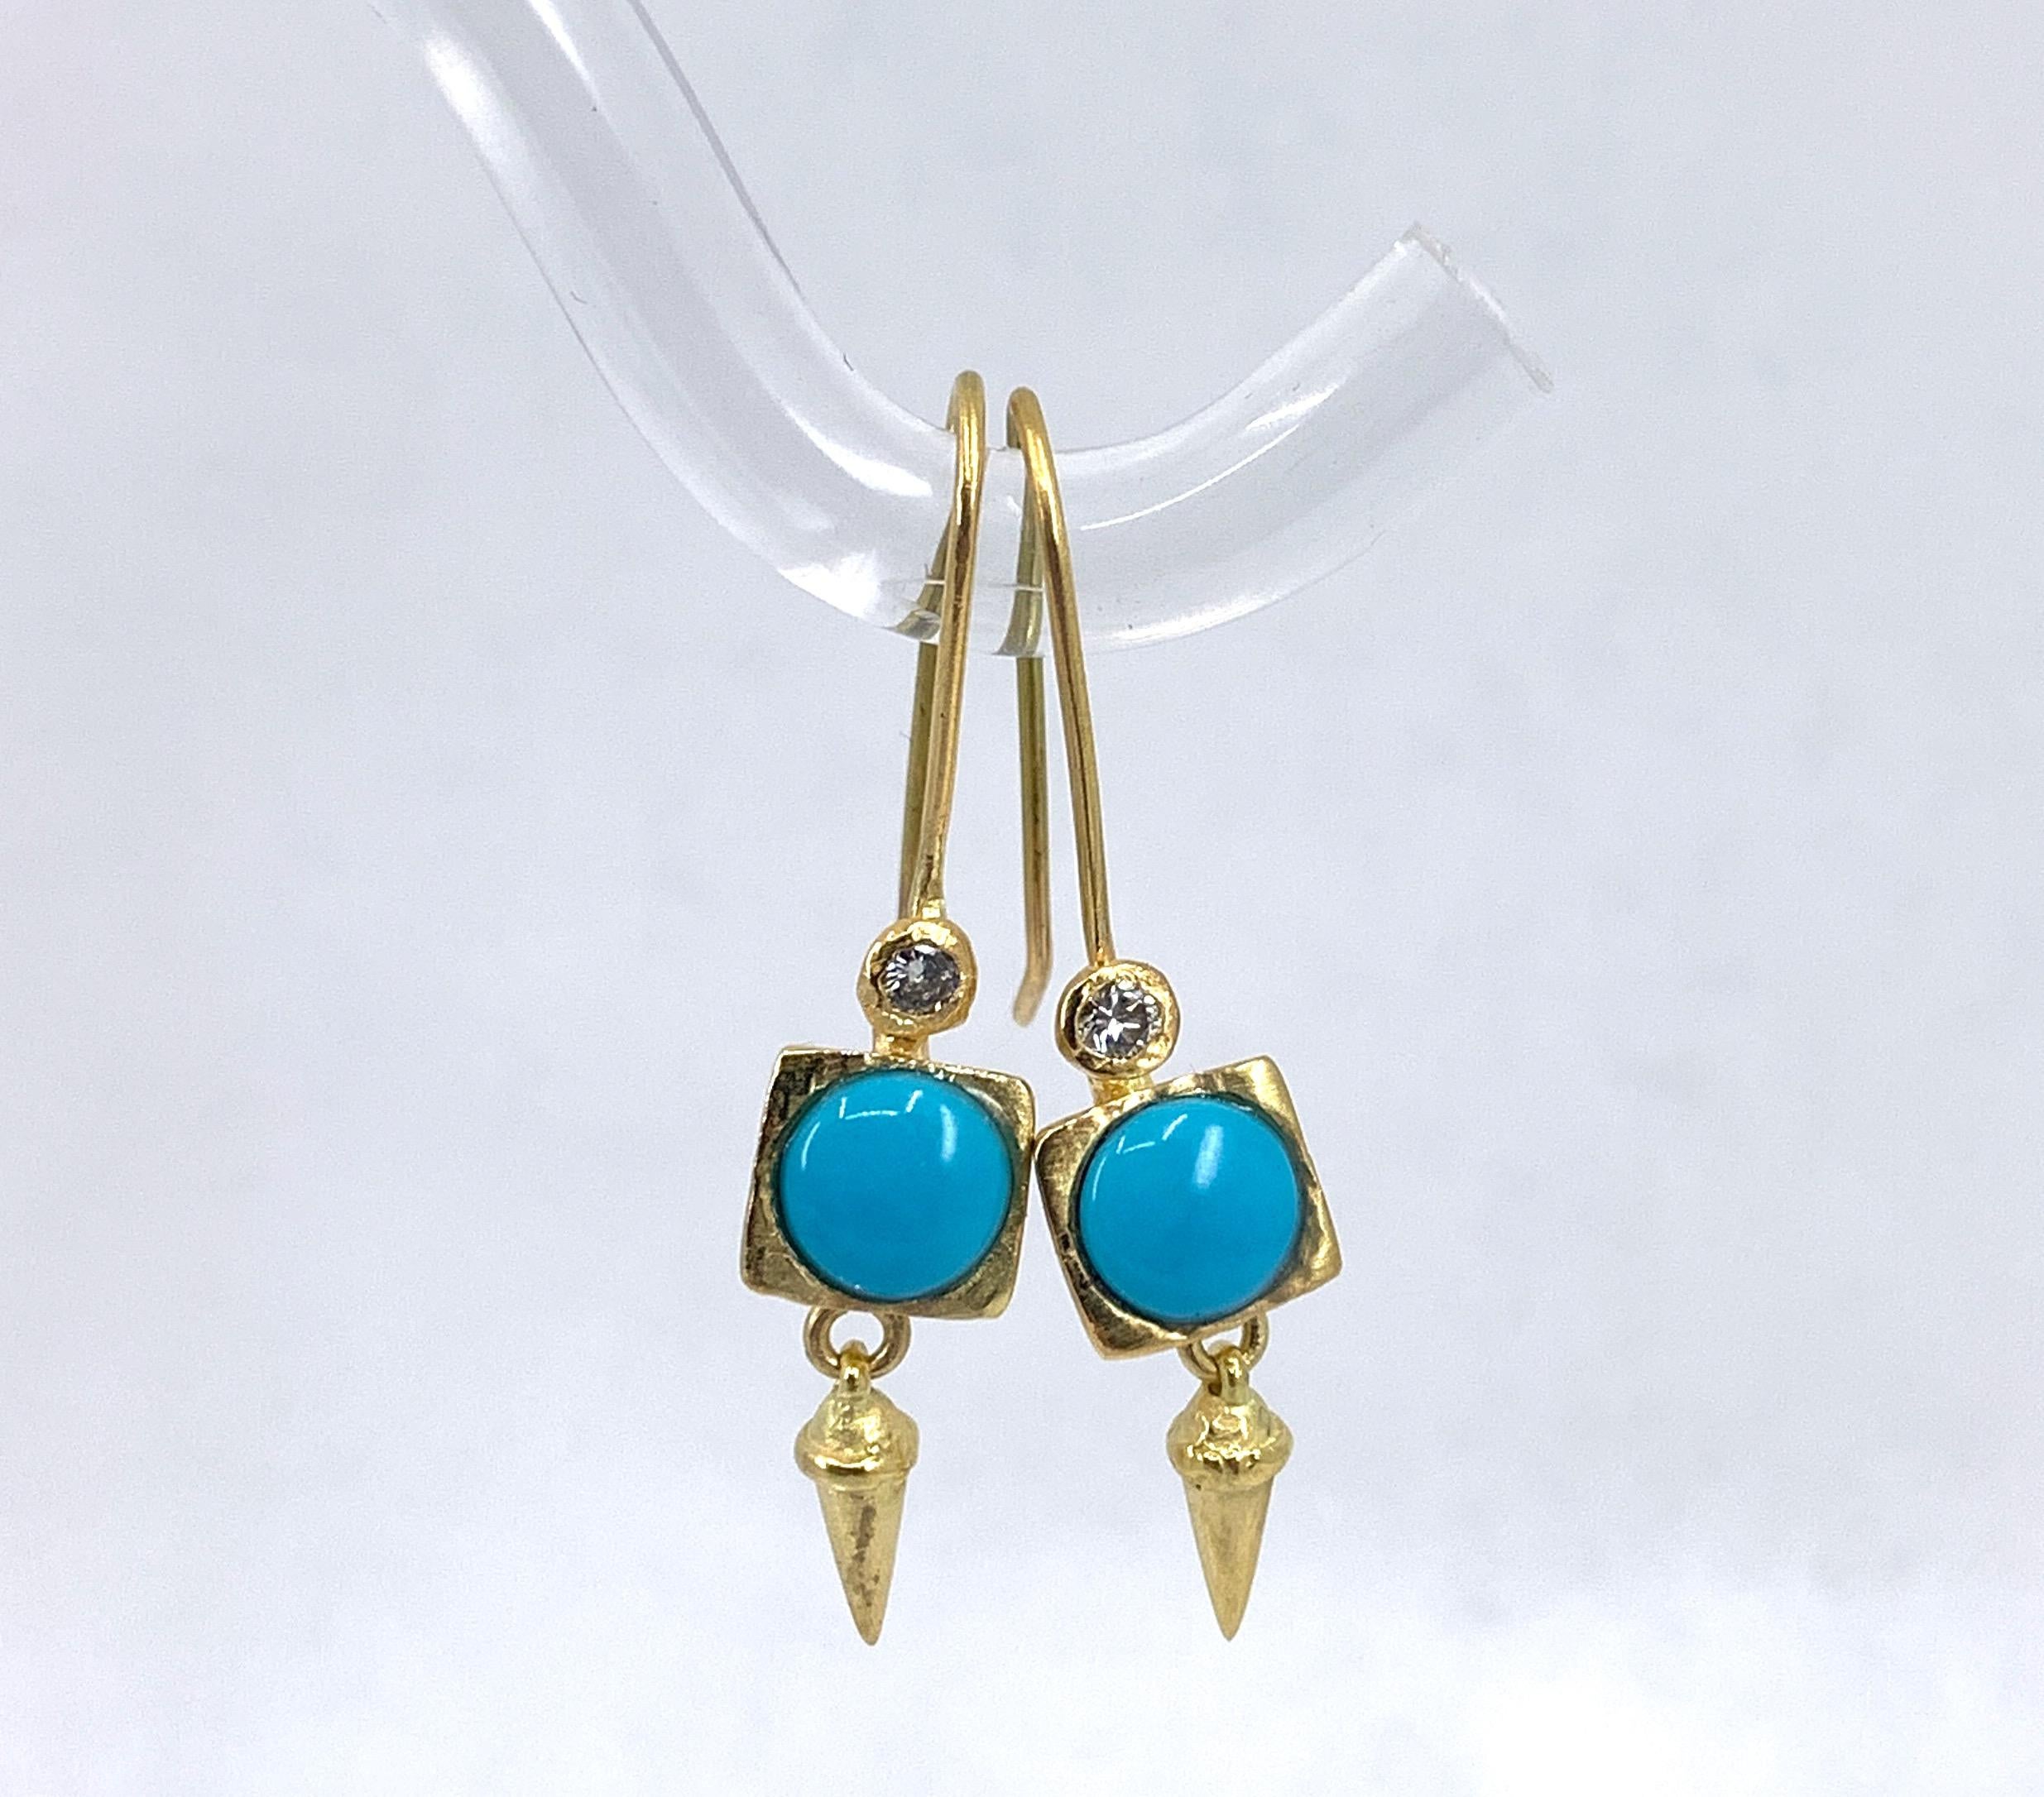 Contemporary Sleeping Beauty Turquoise Dangle Earrings with Diamond Accents in 18 Karat Gold